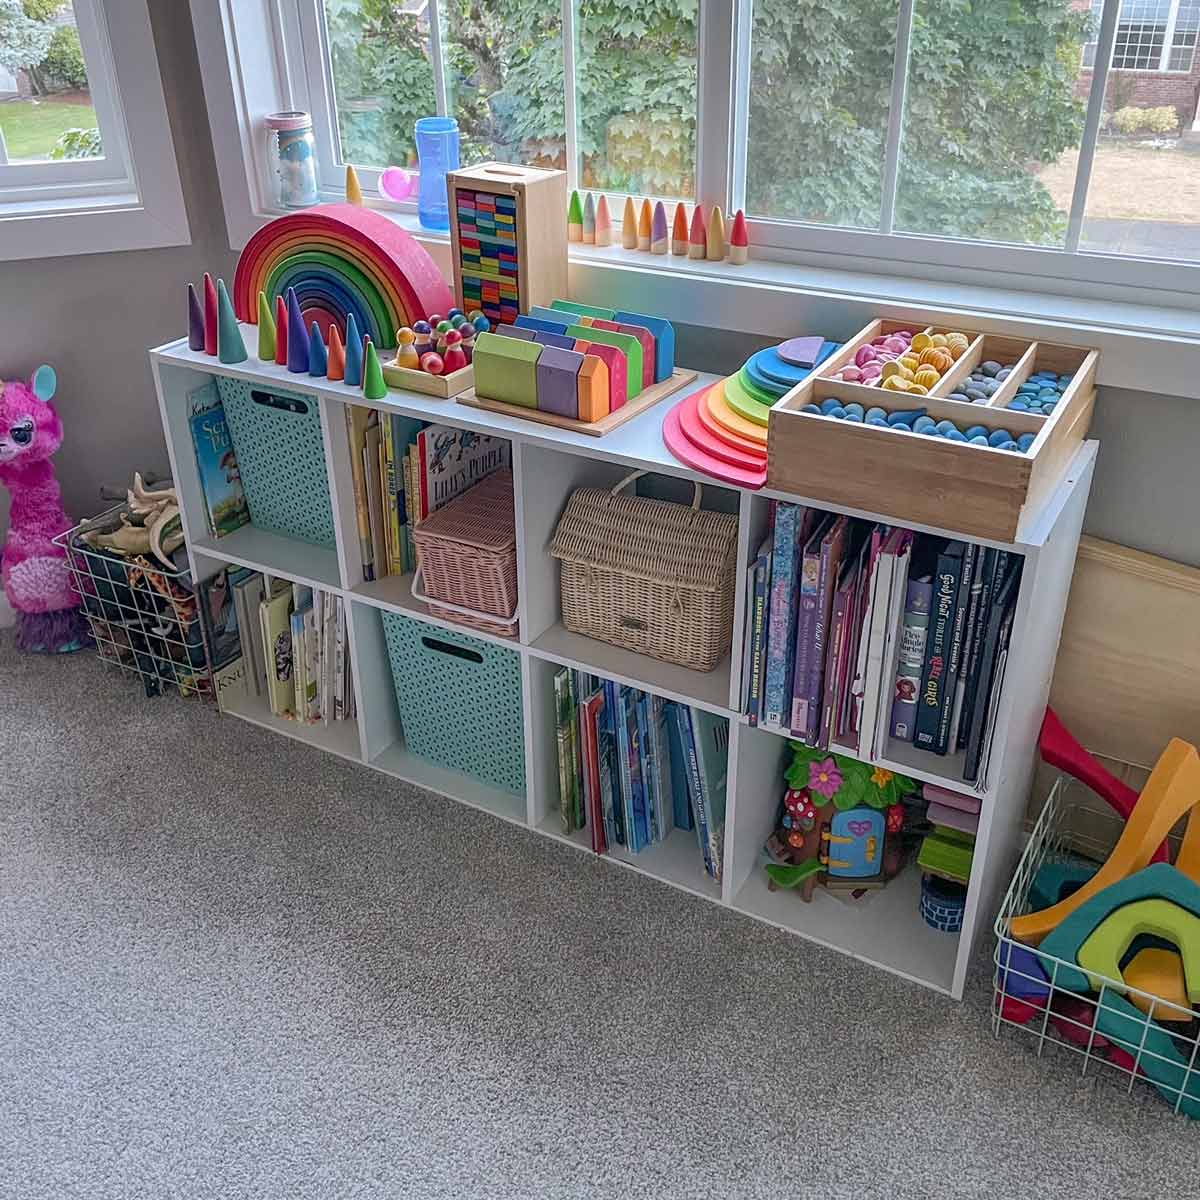 Image shows a child's organized book shelf full of colorful toys.